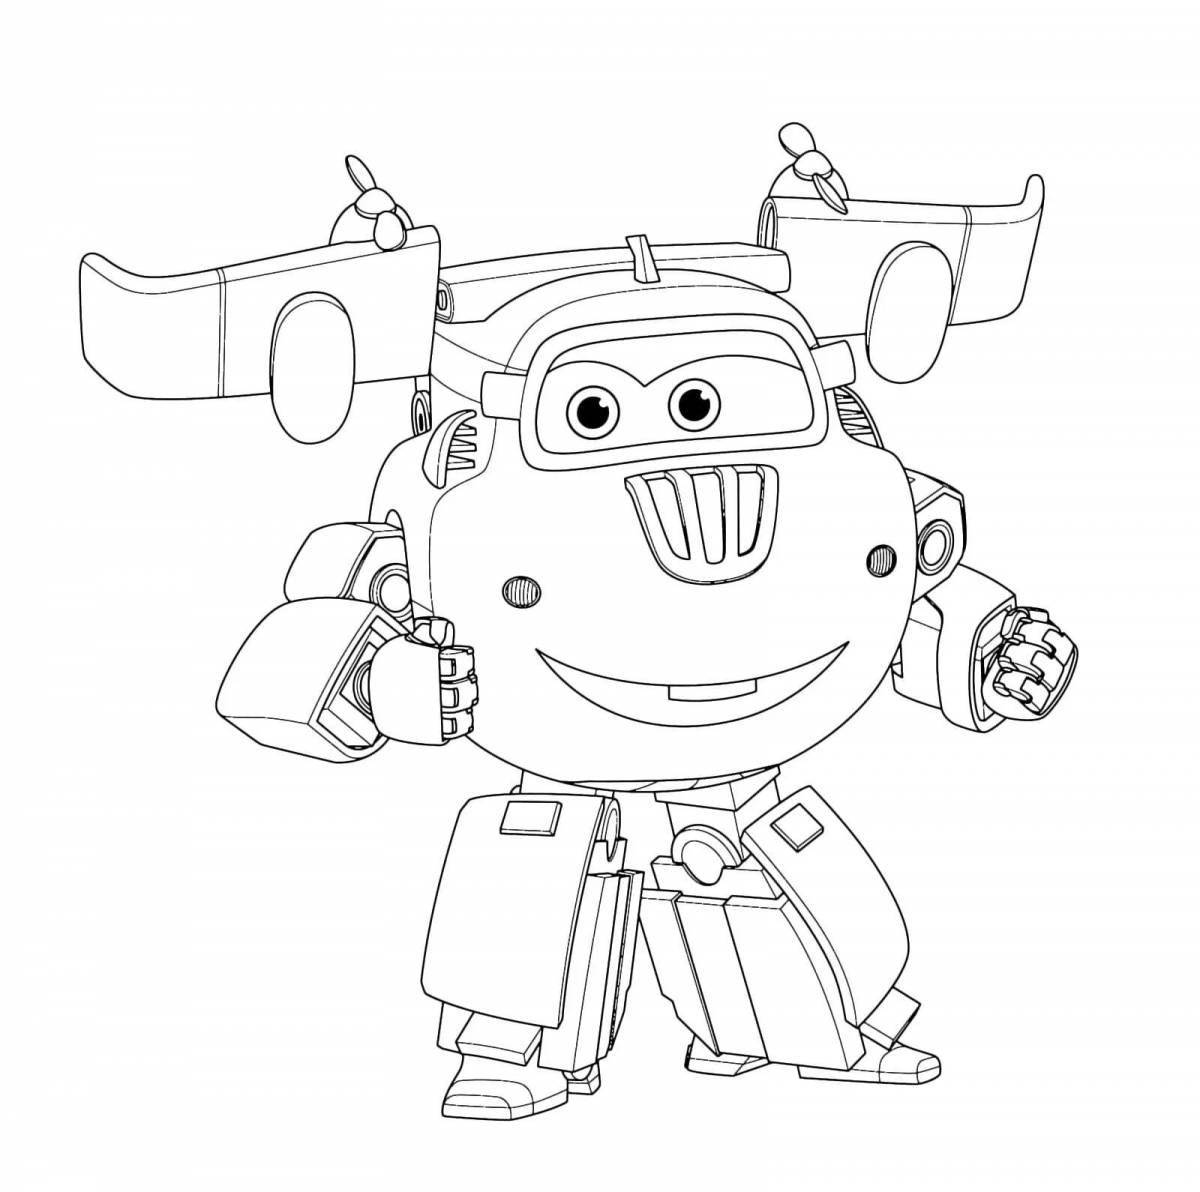 Coloring page bright super wings